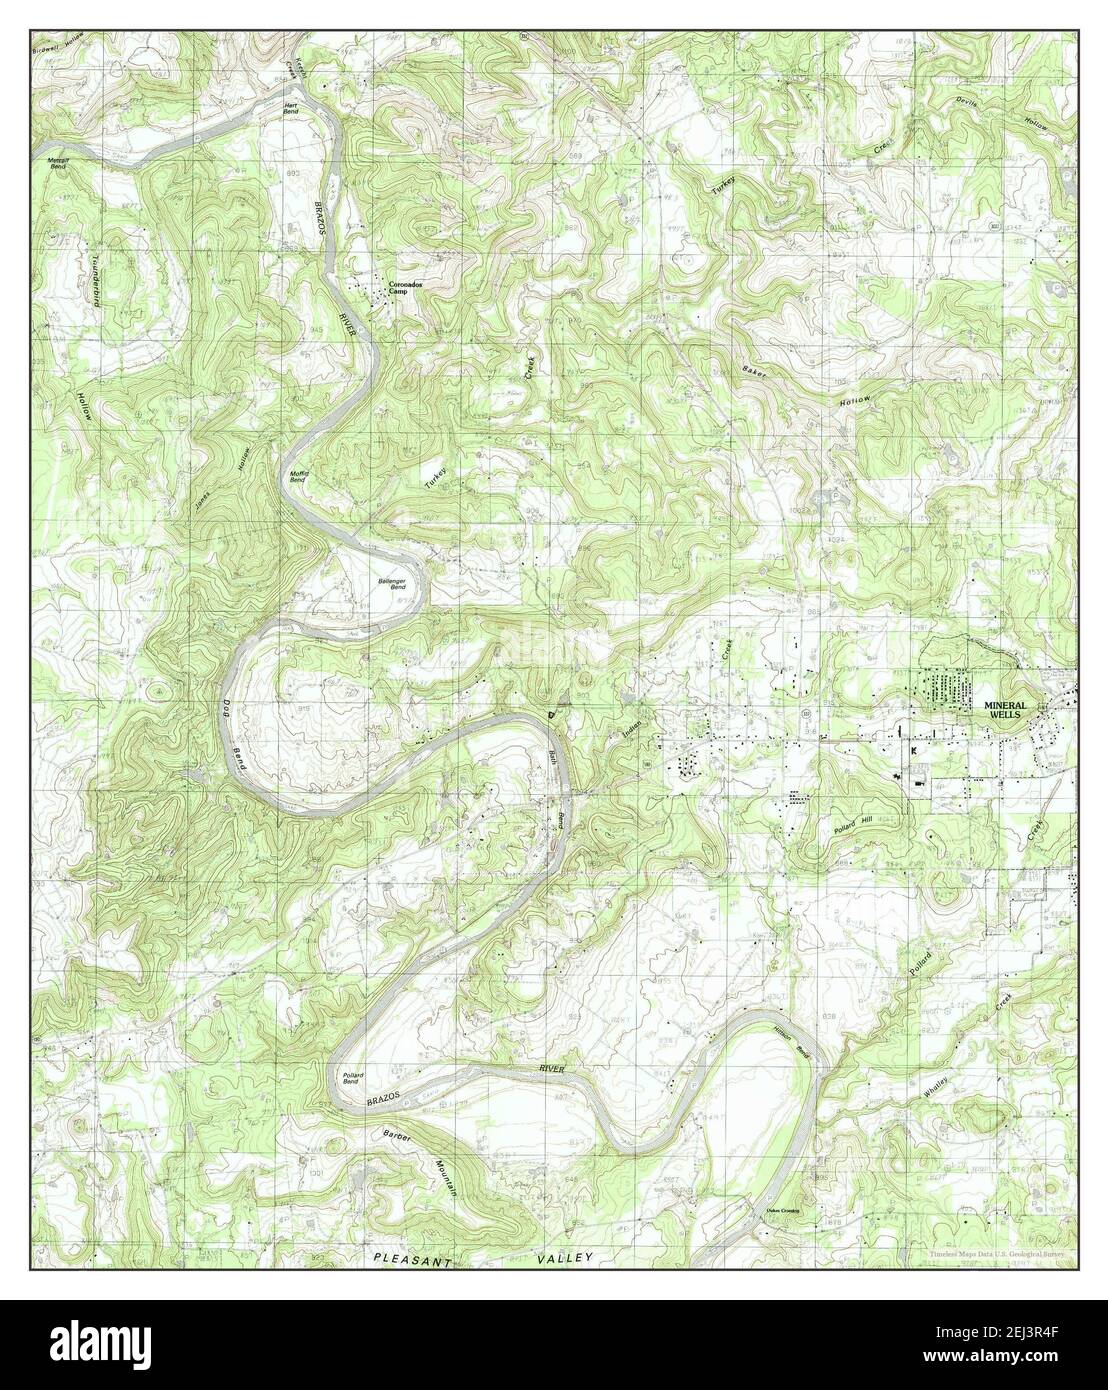 Mineral Wells West, Texas, map 1984, 1:24000, United States of America by Timeless Maps, data U.S. Geological Survey Foto Stock